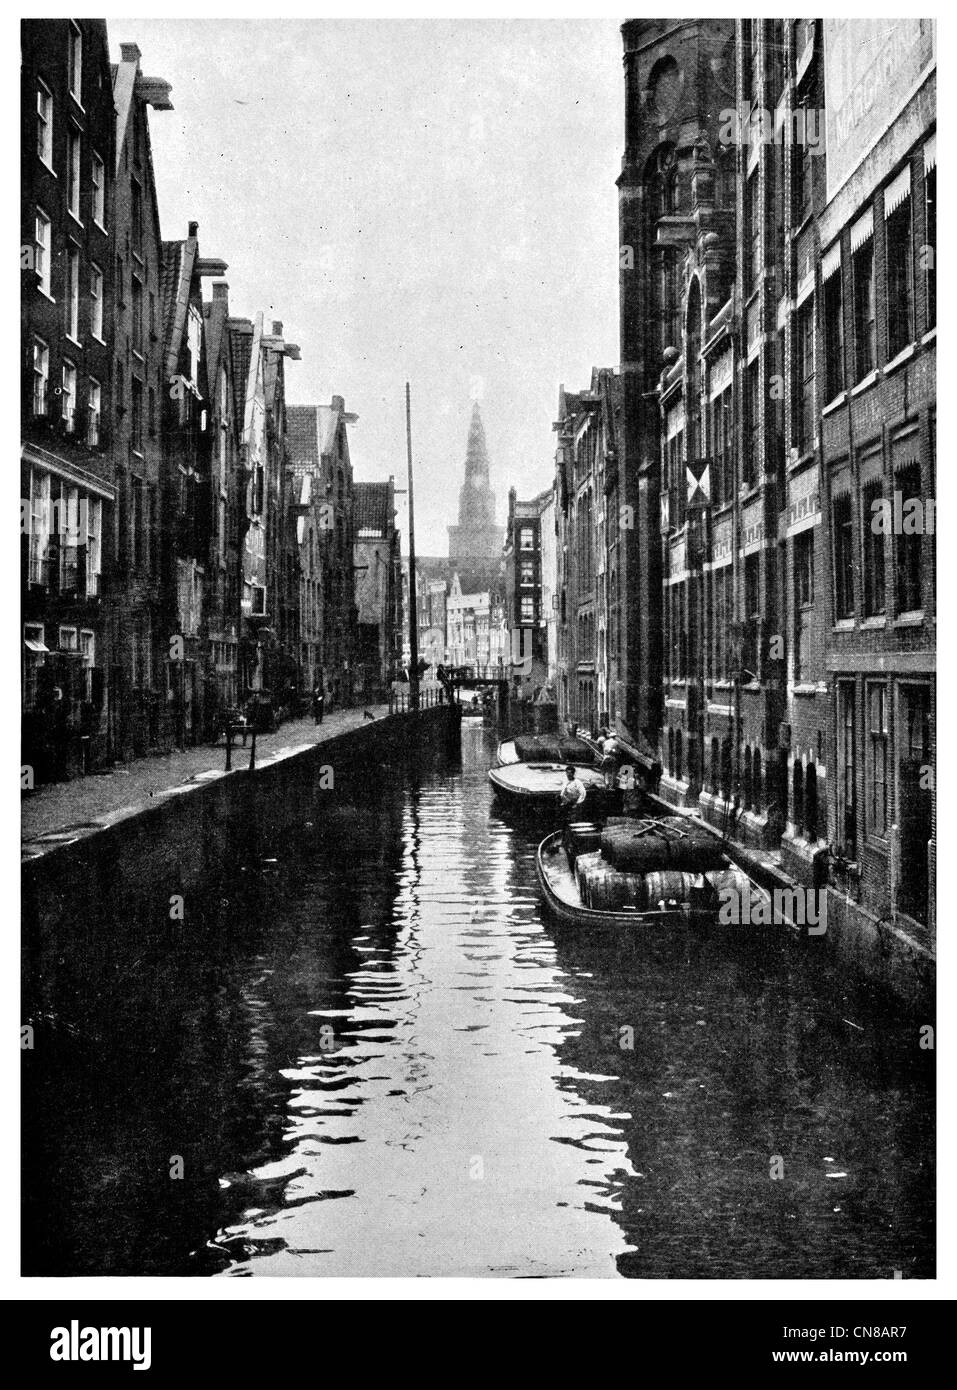 First published 1915 Old Amsterdam Warehouse trade cargo merchant quarter canal barge narrow boat Stock Photo